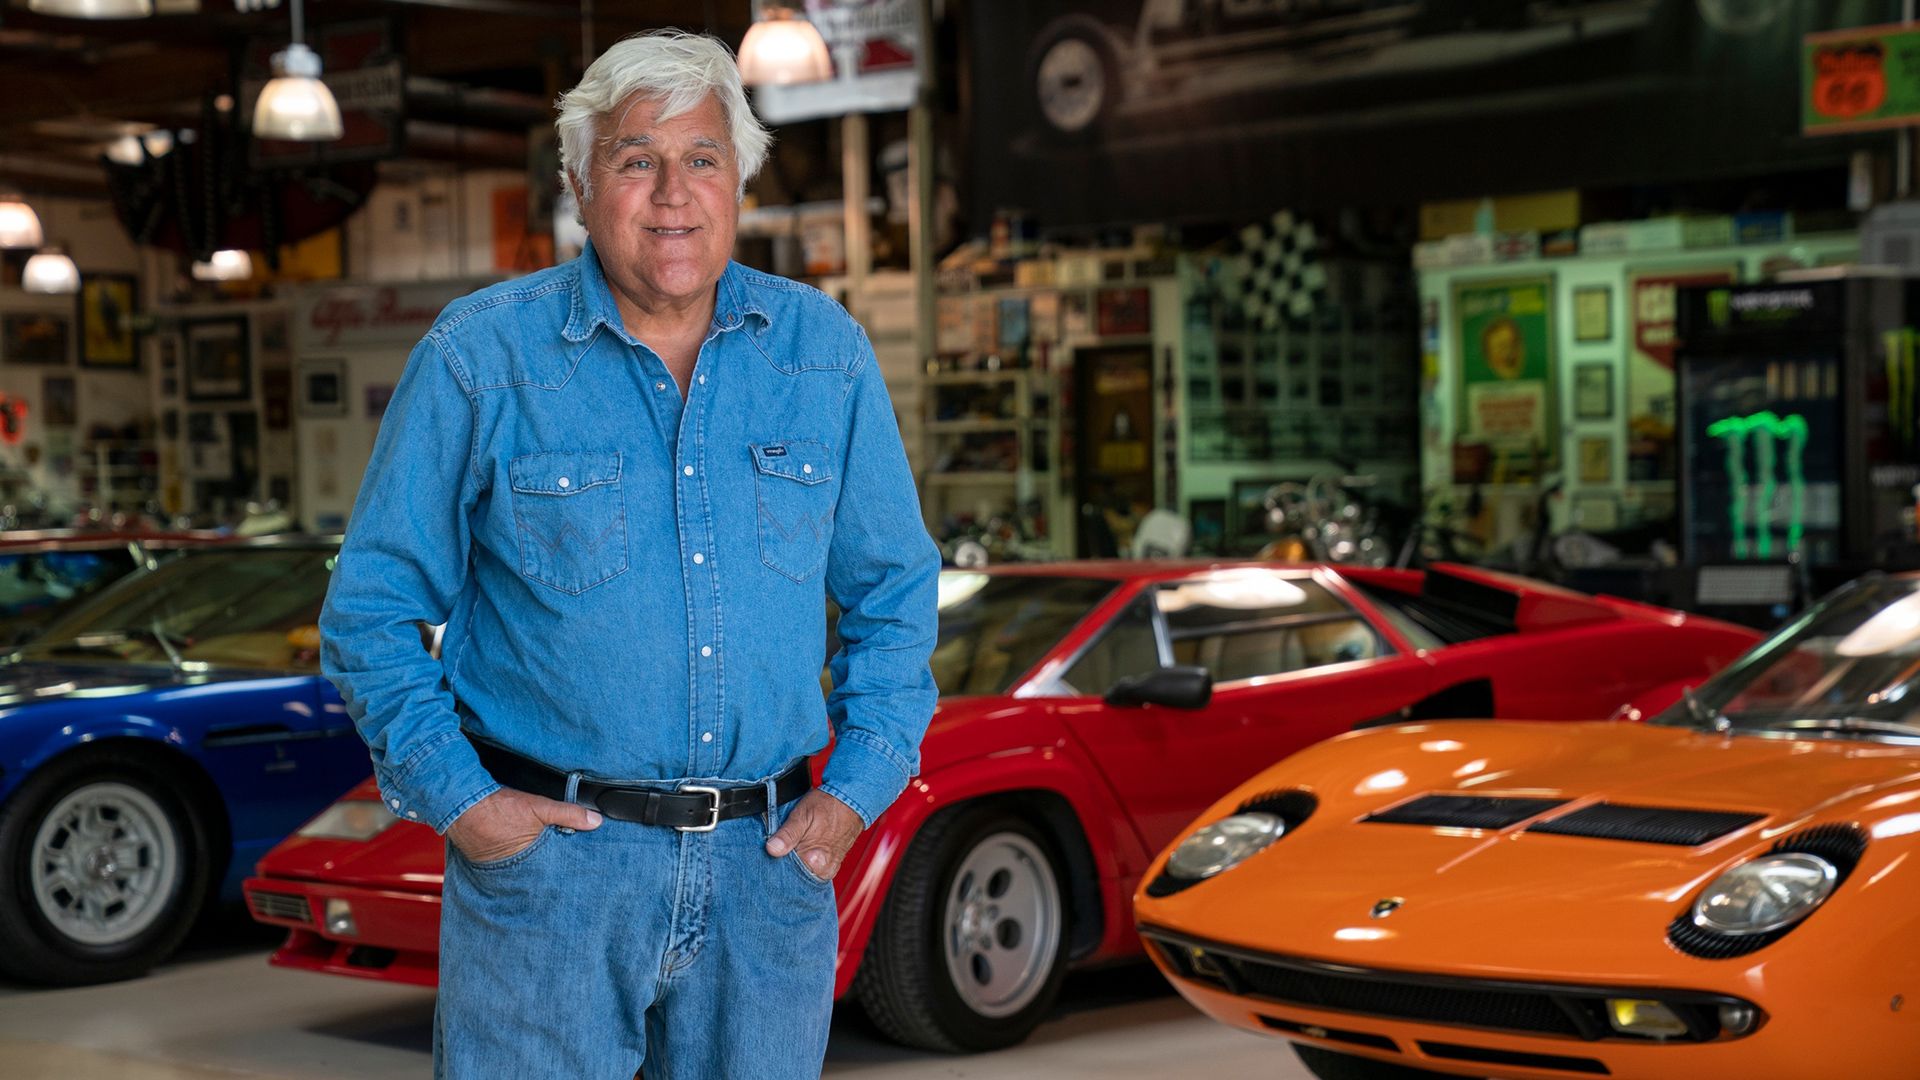 The Real Reason Why Jay Leno’s Garage Was Canceled